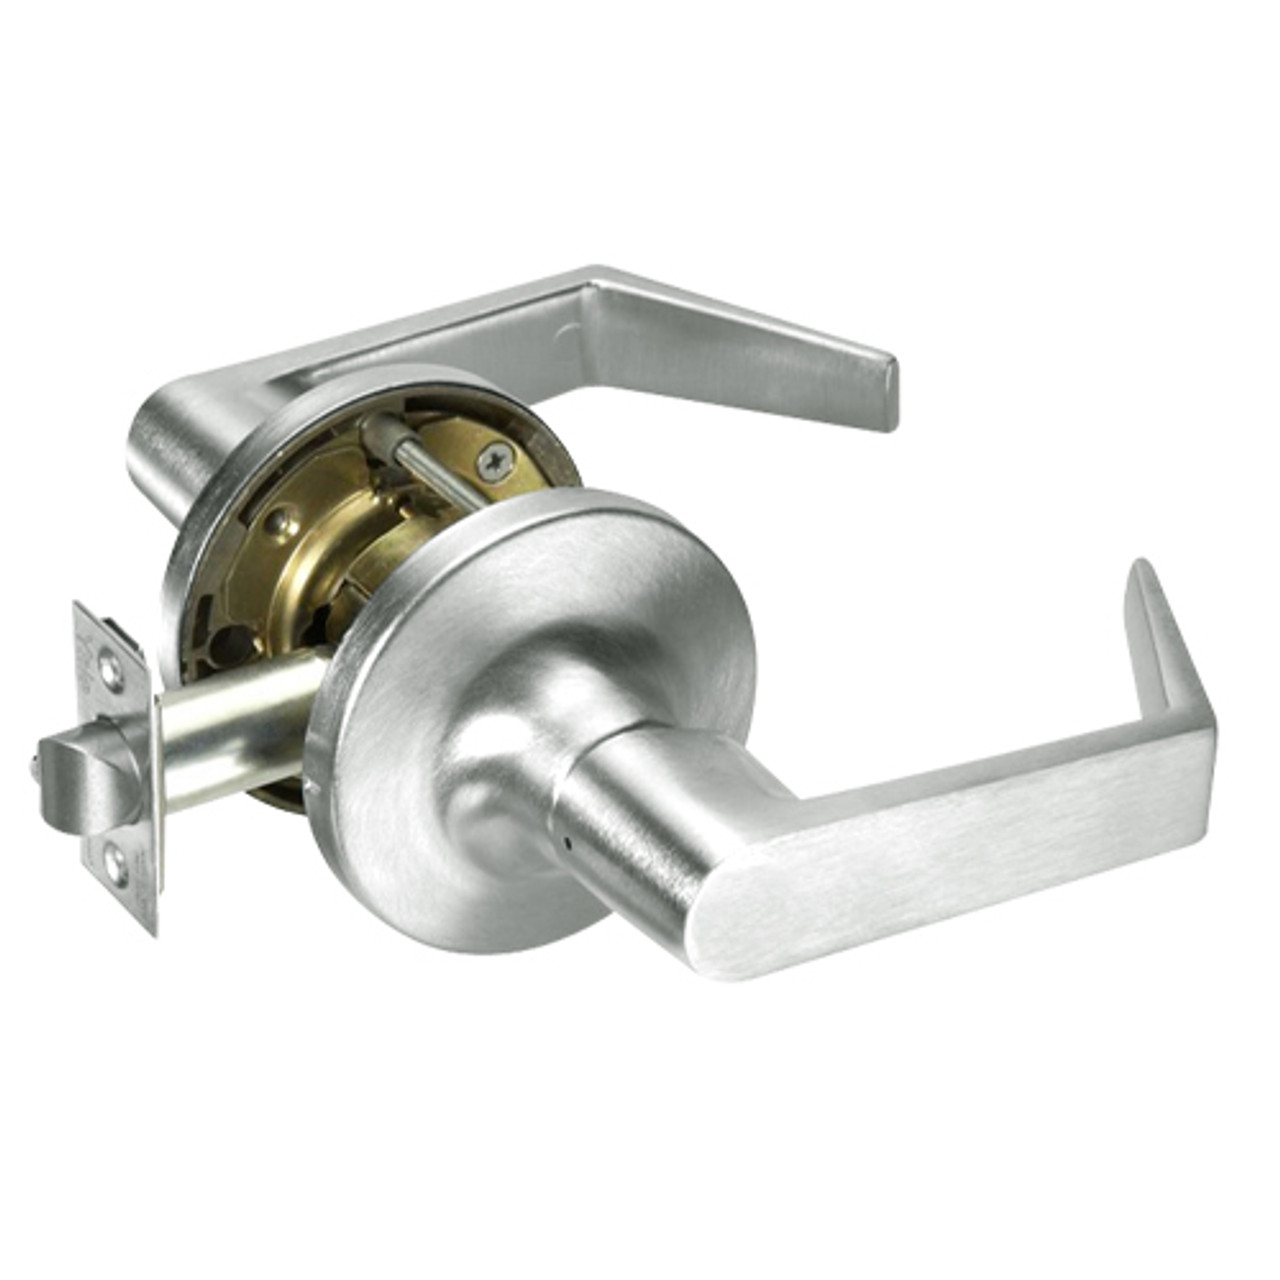 AU5401LN-619 Yale 5400LN Series Non-Keyed Passage or Closet Latchset Cylindrical Locks with Augusta Lever in Satin Nickel